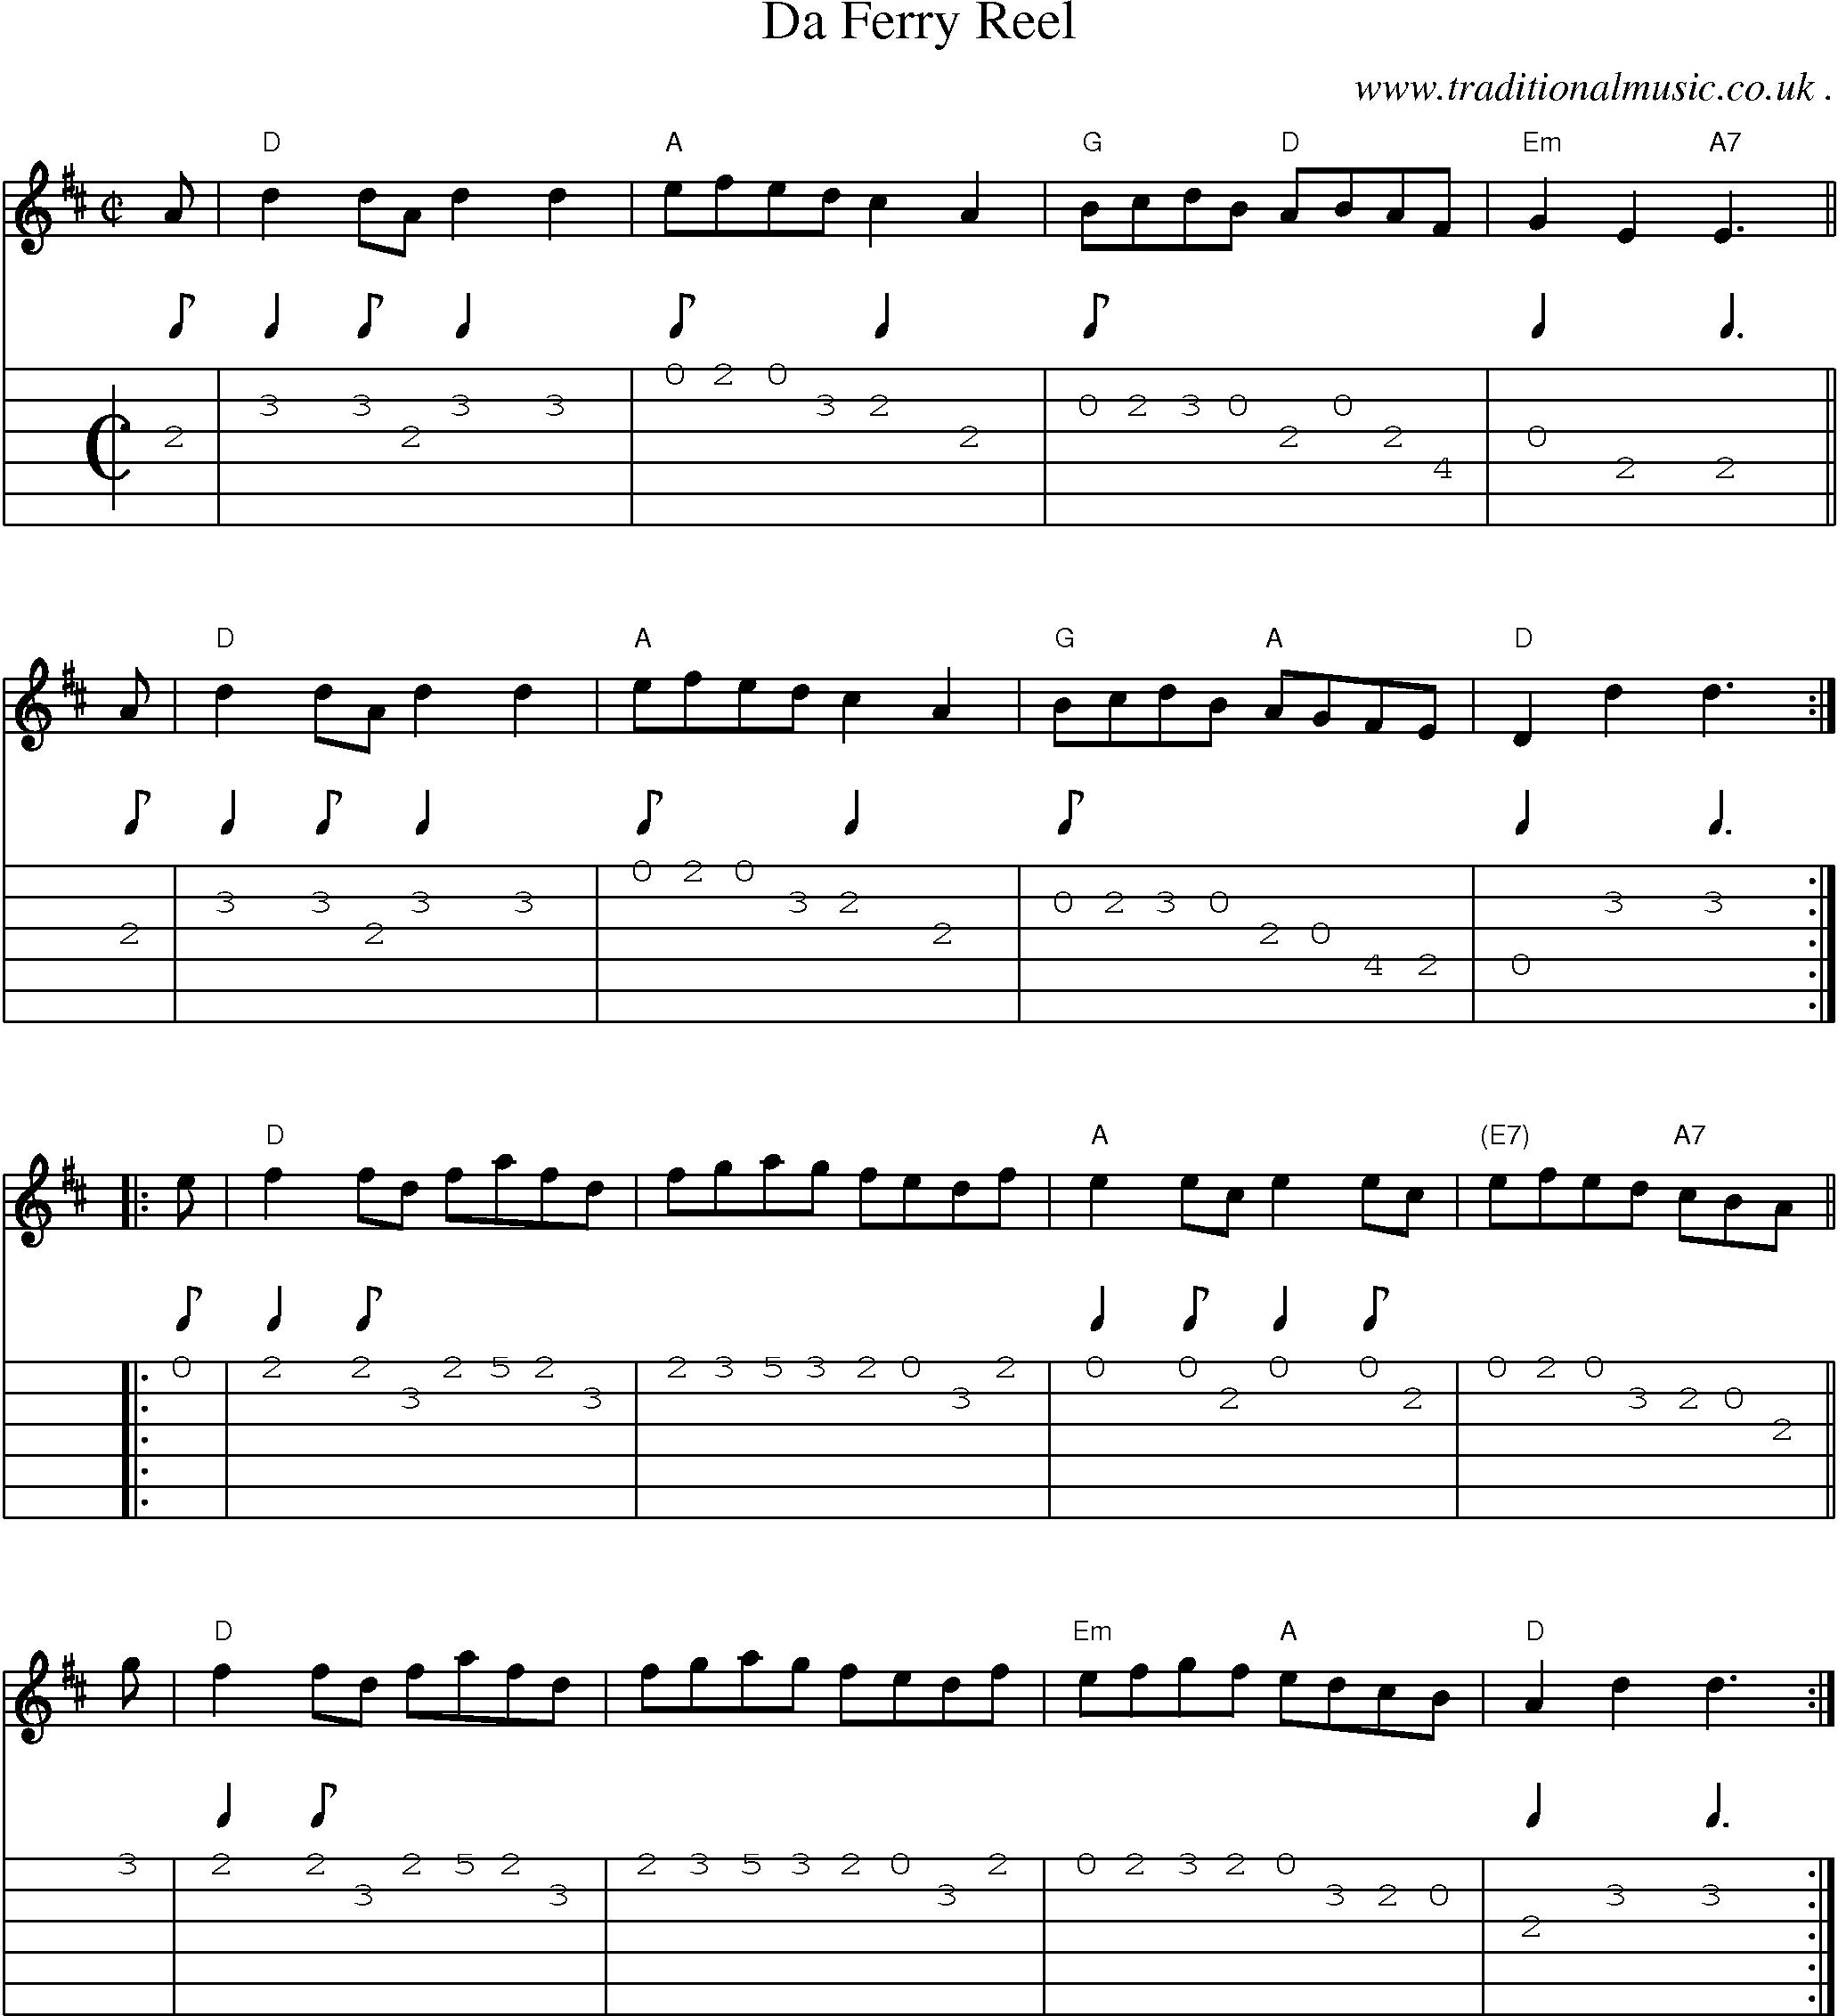 Sheet-music  score, Chords and Guitar Tabs for Da Ferry Reel